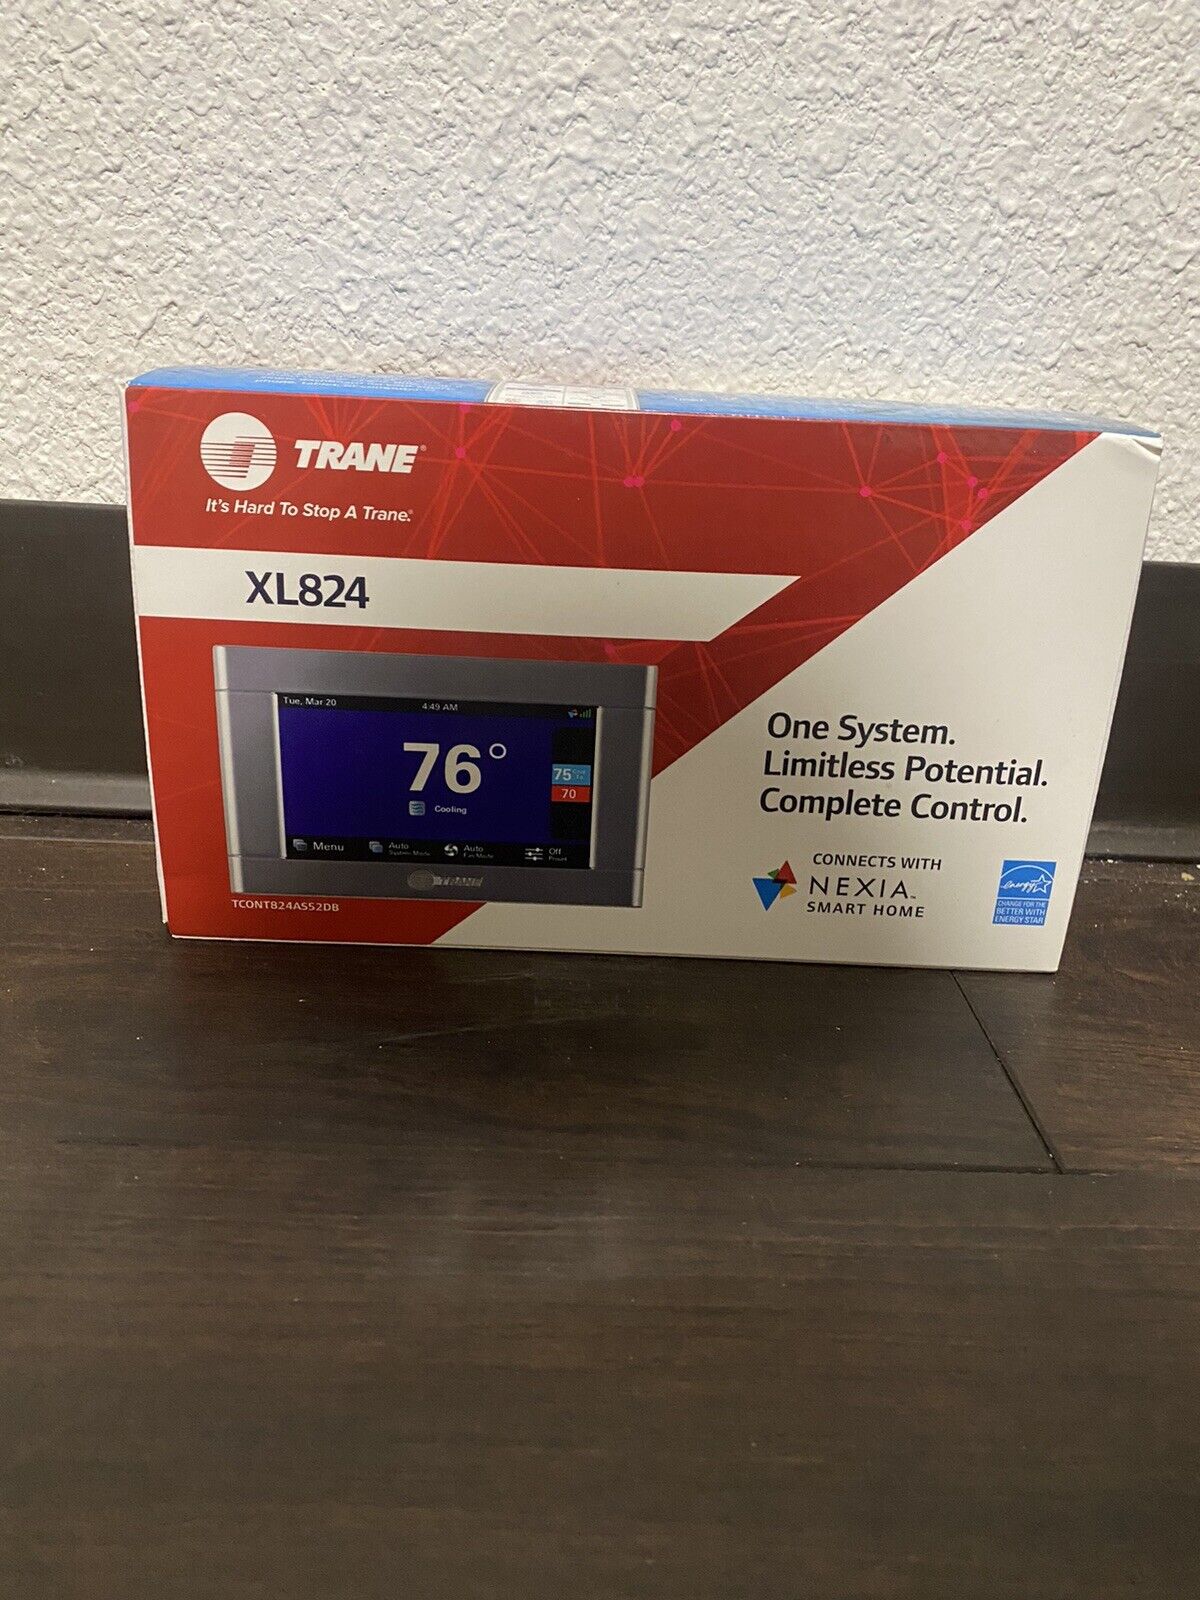 Trane XL824 Programmable Comfort Control Wi-Fi Thermostat Brand New Sealed